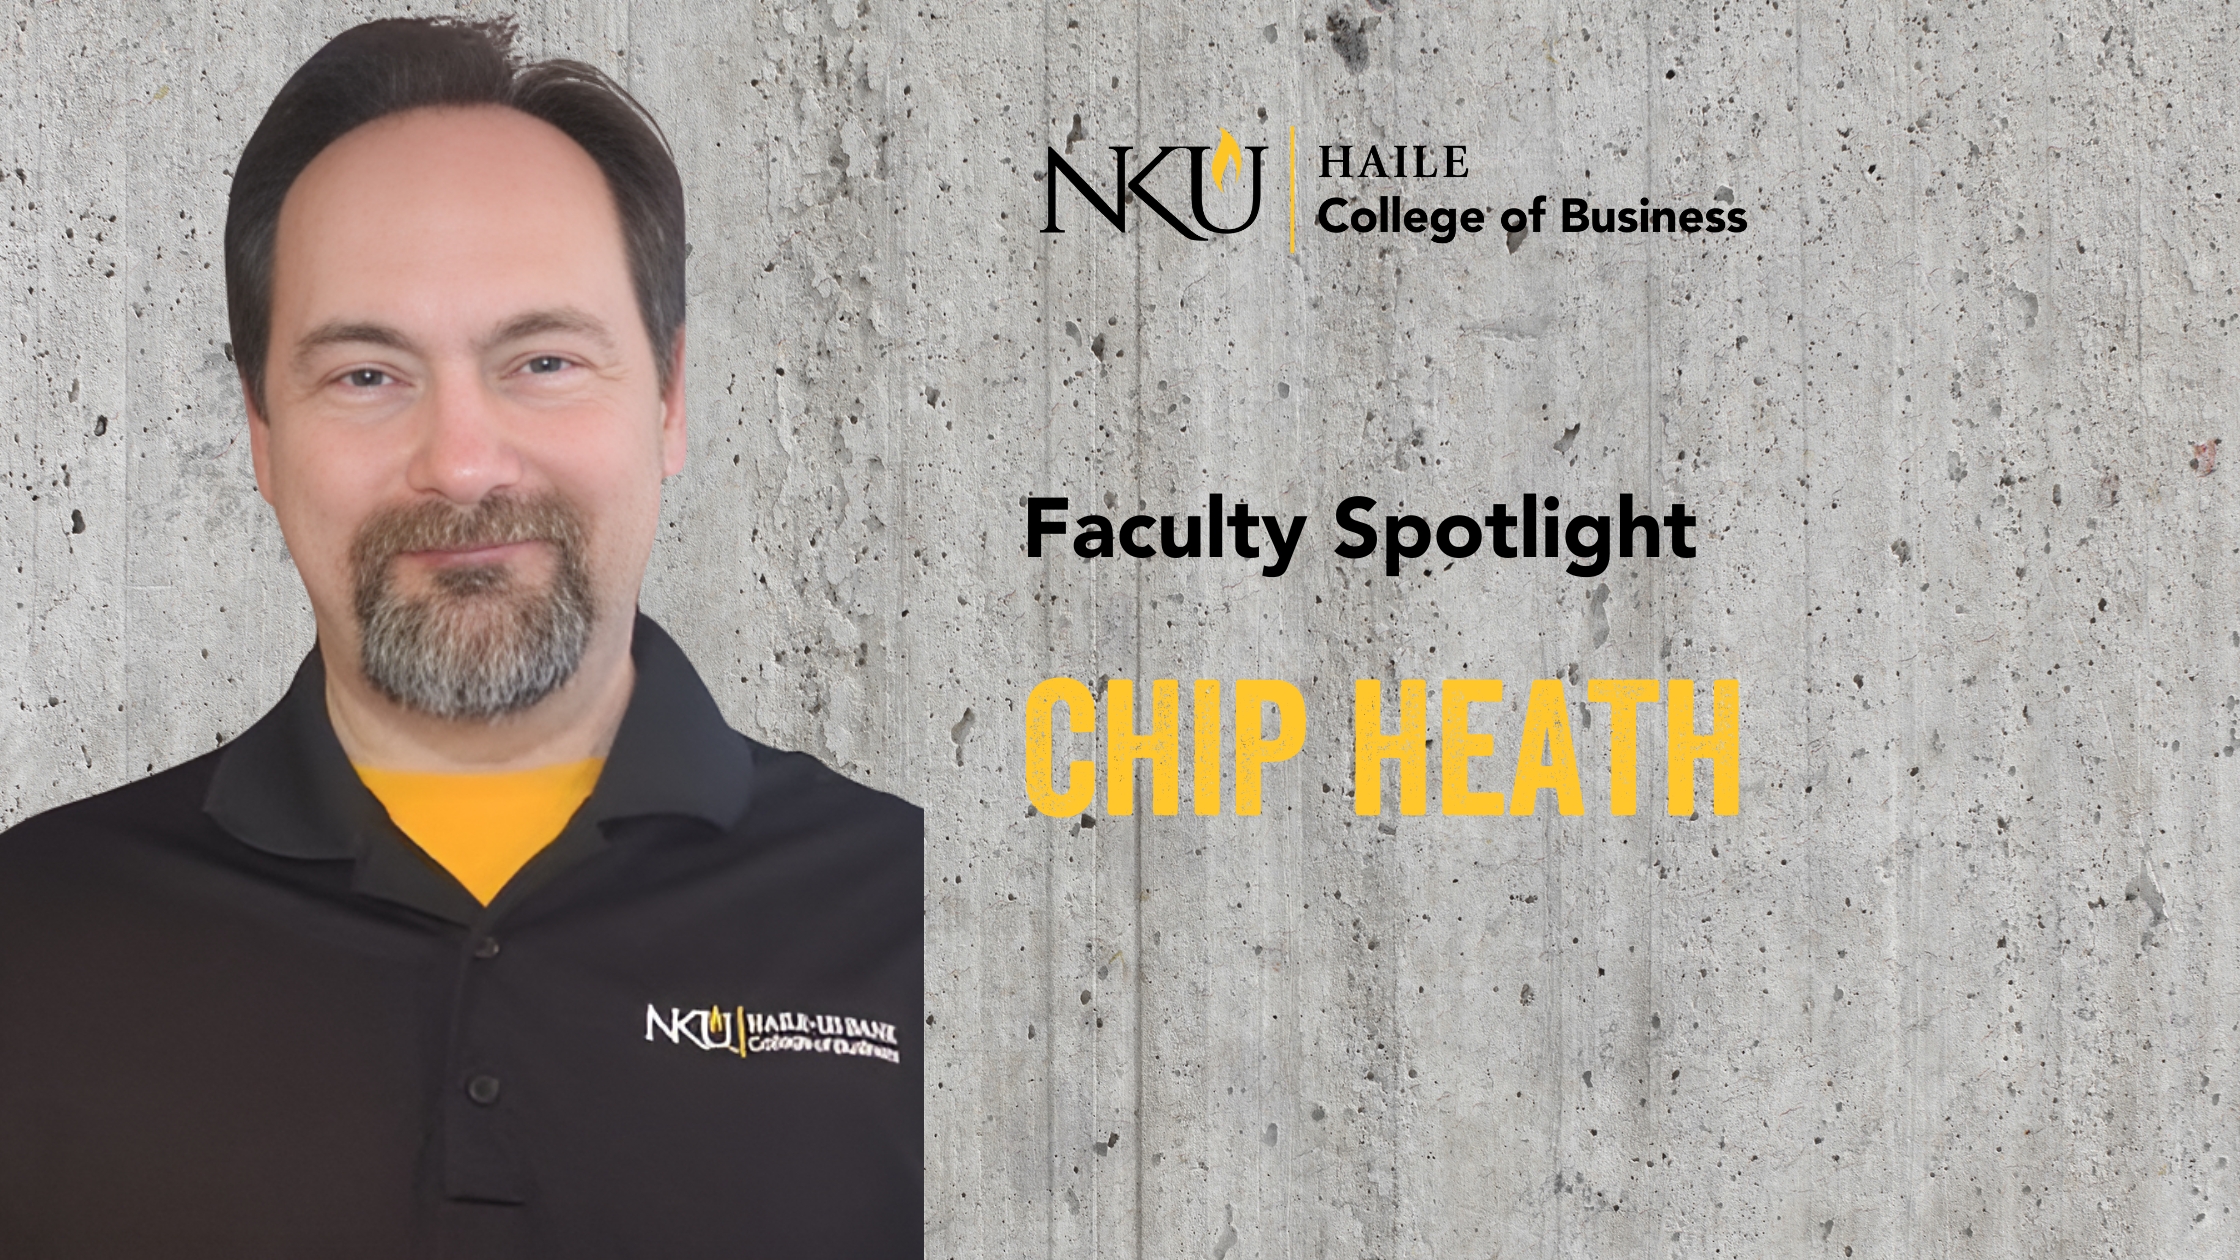 image with the words, "Faculty Spotlight and a photo of Chip Heath"